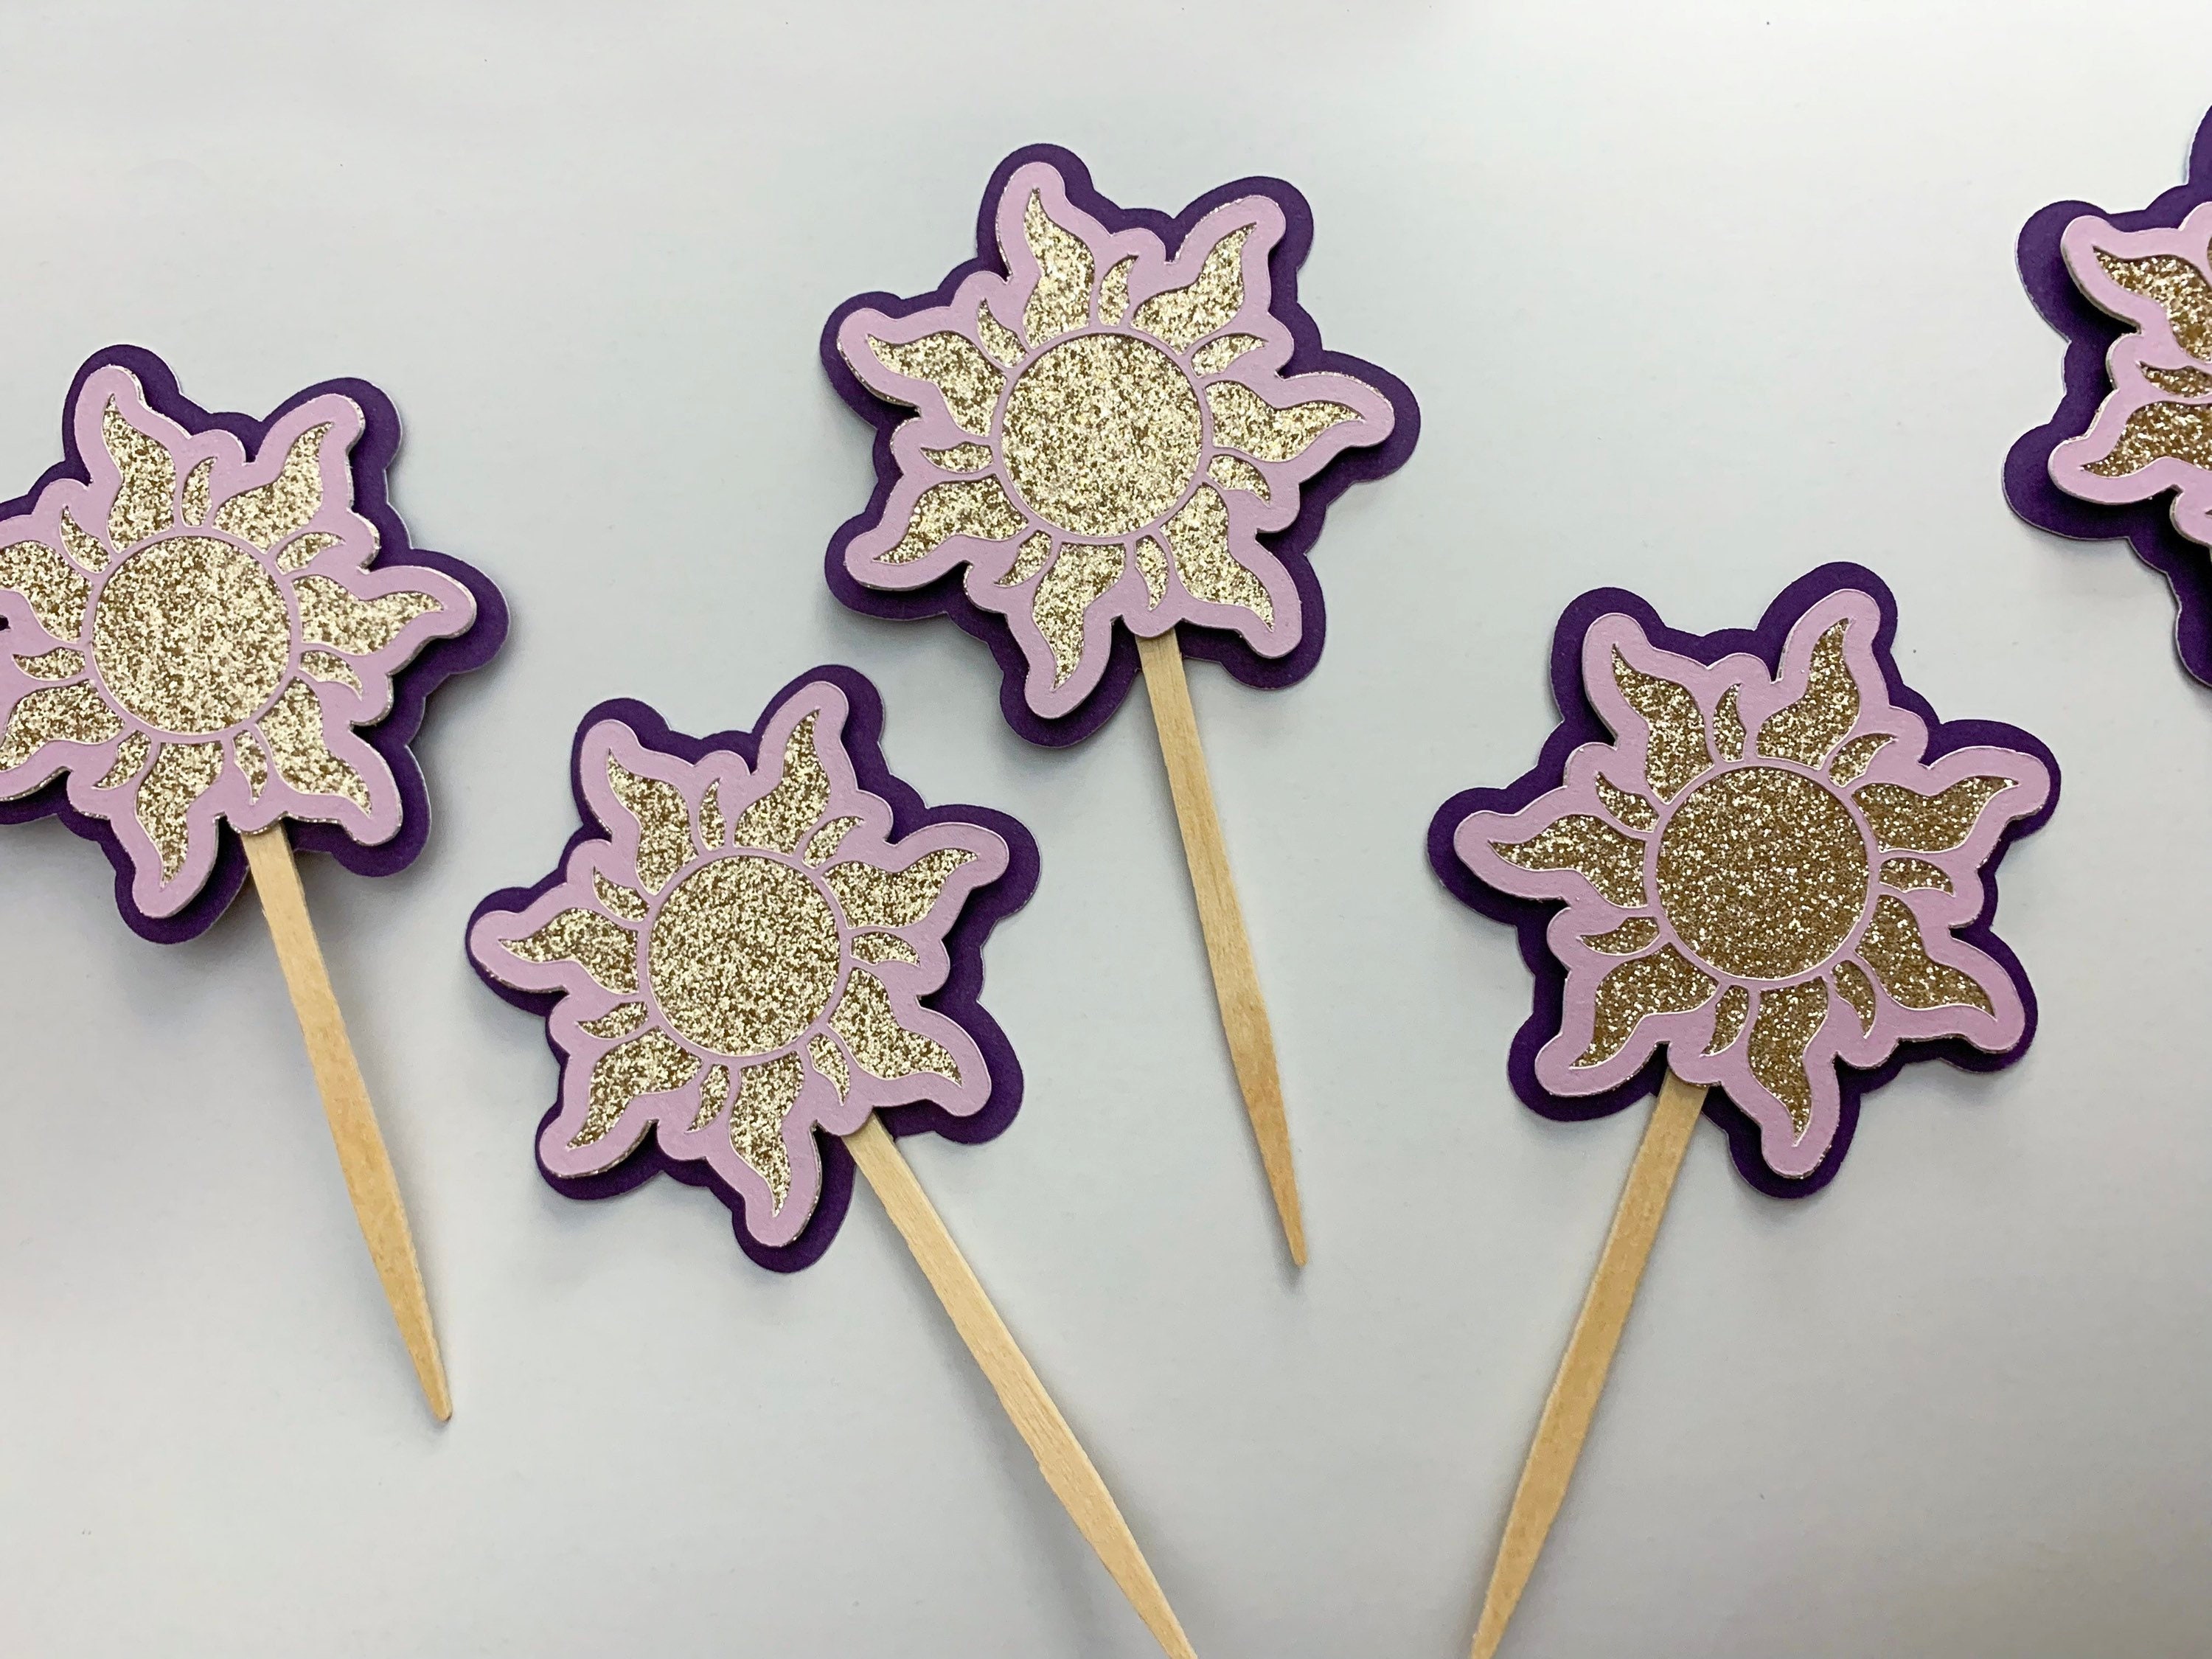 Tangled Cupcake Toppers, Gold Glittered Star Cupcake Toppers, Rapunzel  Theme Cupcake Topper, Tangled Party Decor Set of 6ct. 